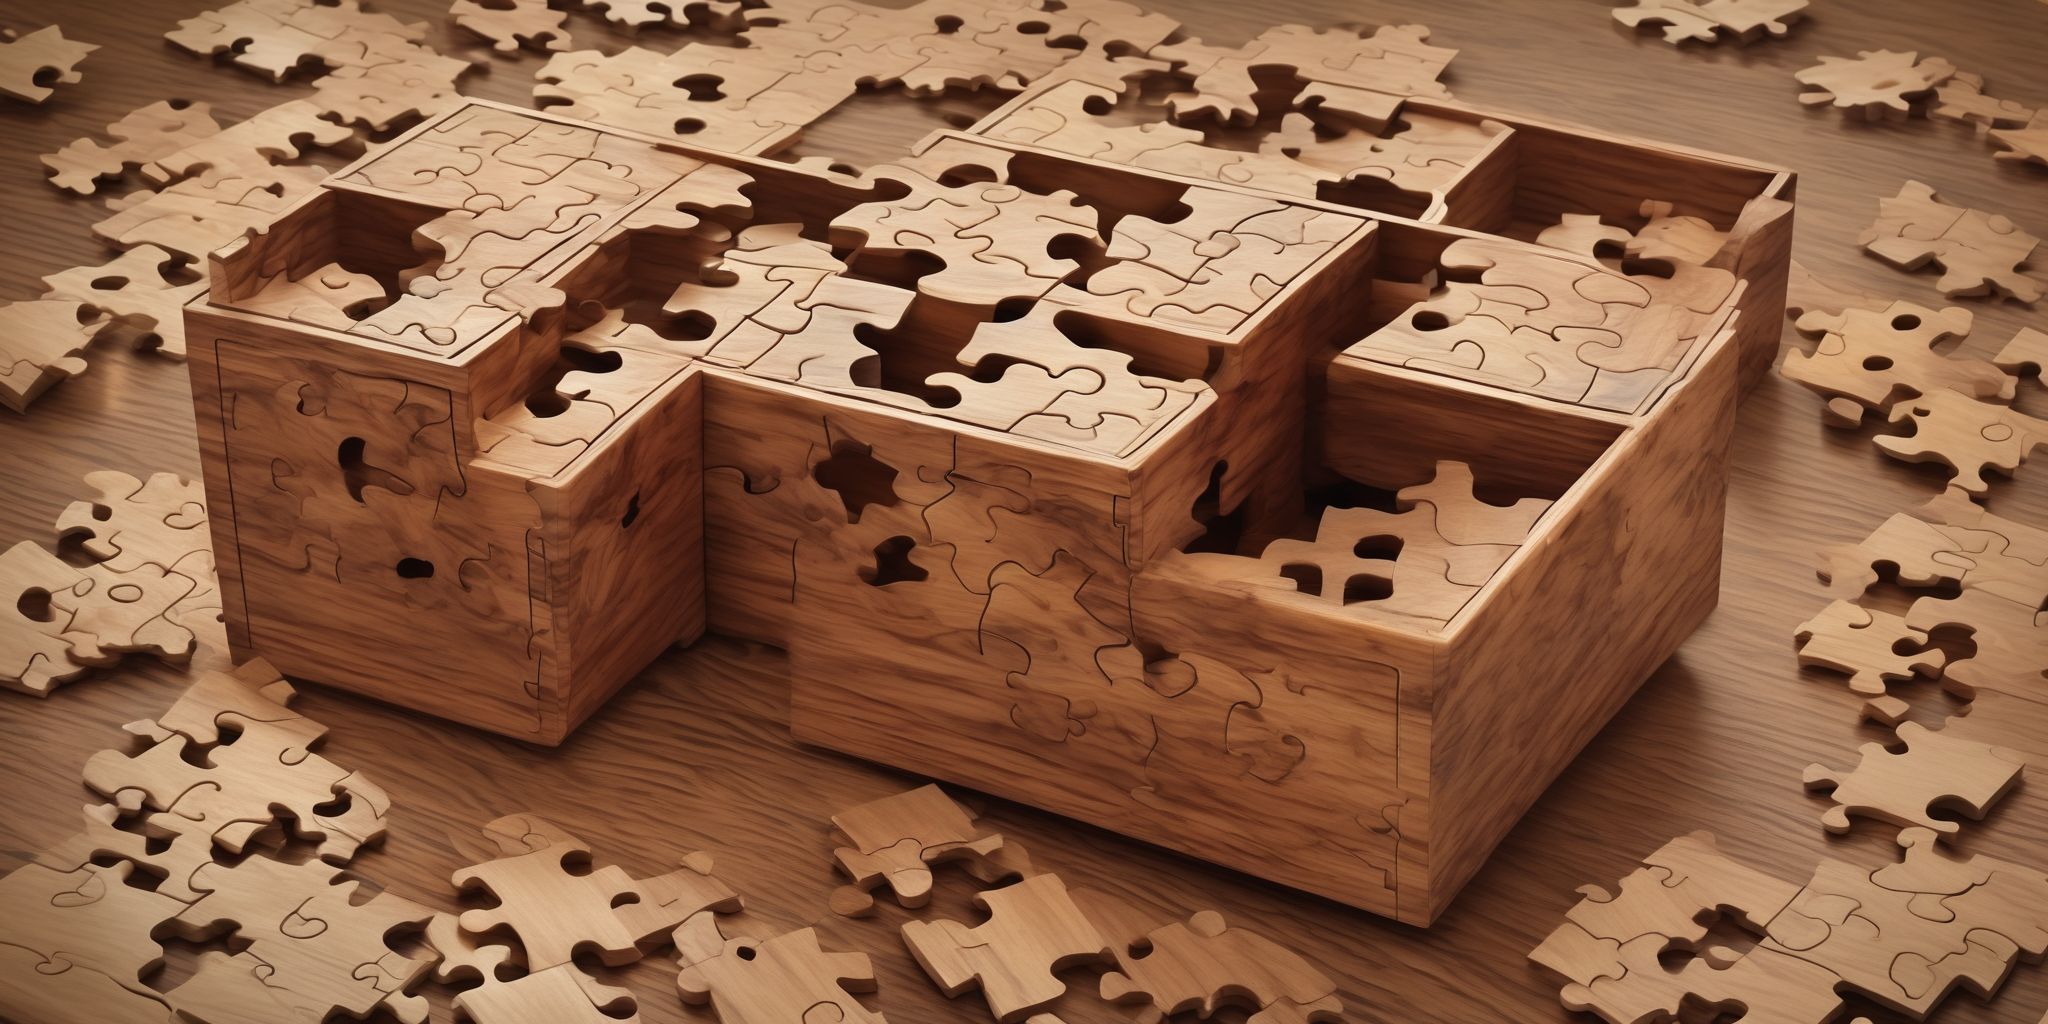 Puzzle box  in realistic, photographic style